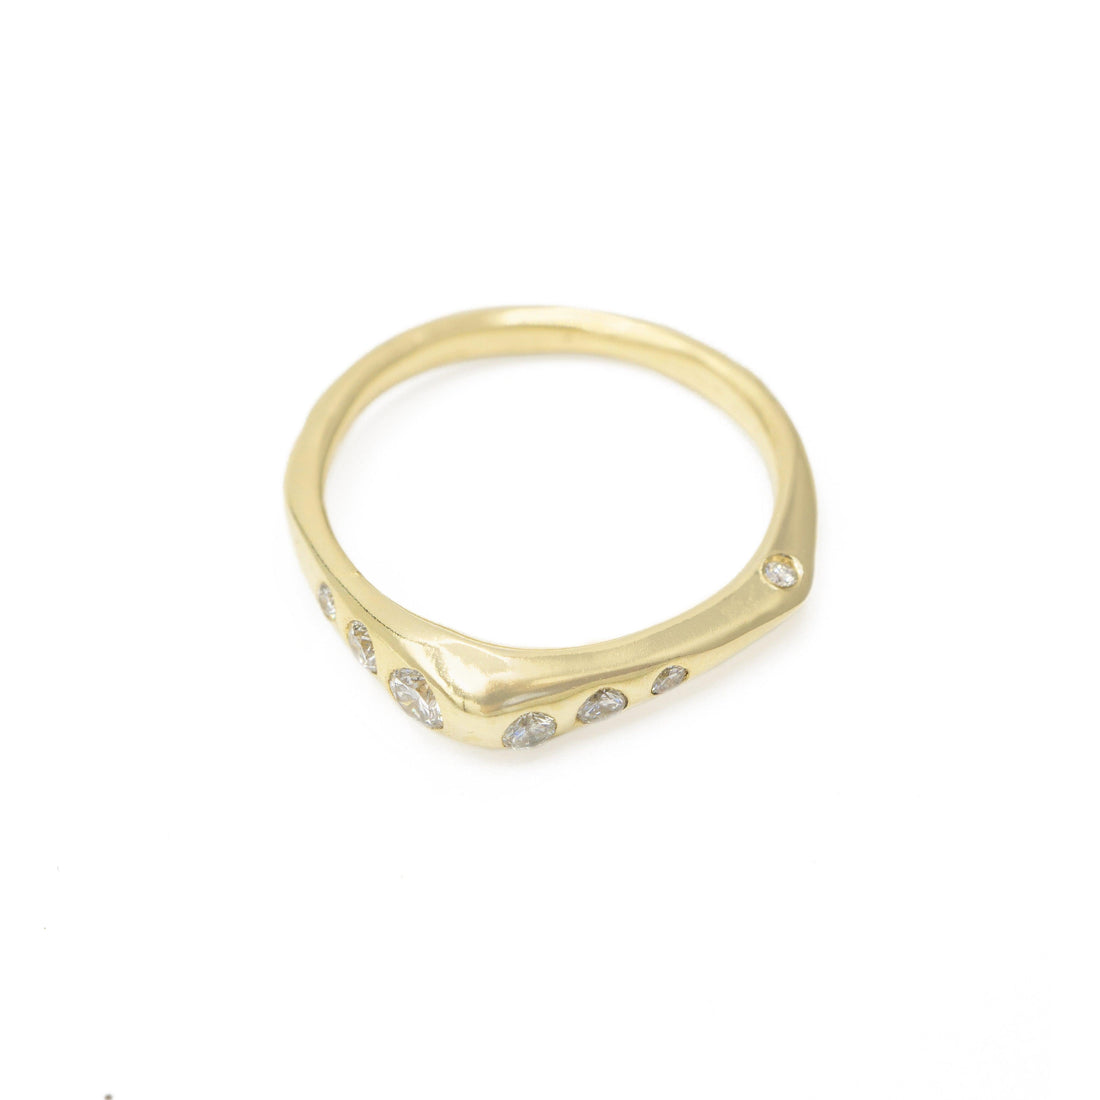 Hidden Diamond Astra Band in 14k yellow gold with diamond accents by Erin Cuff Jewelry.